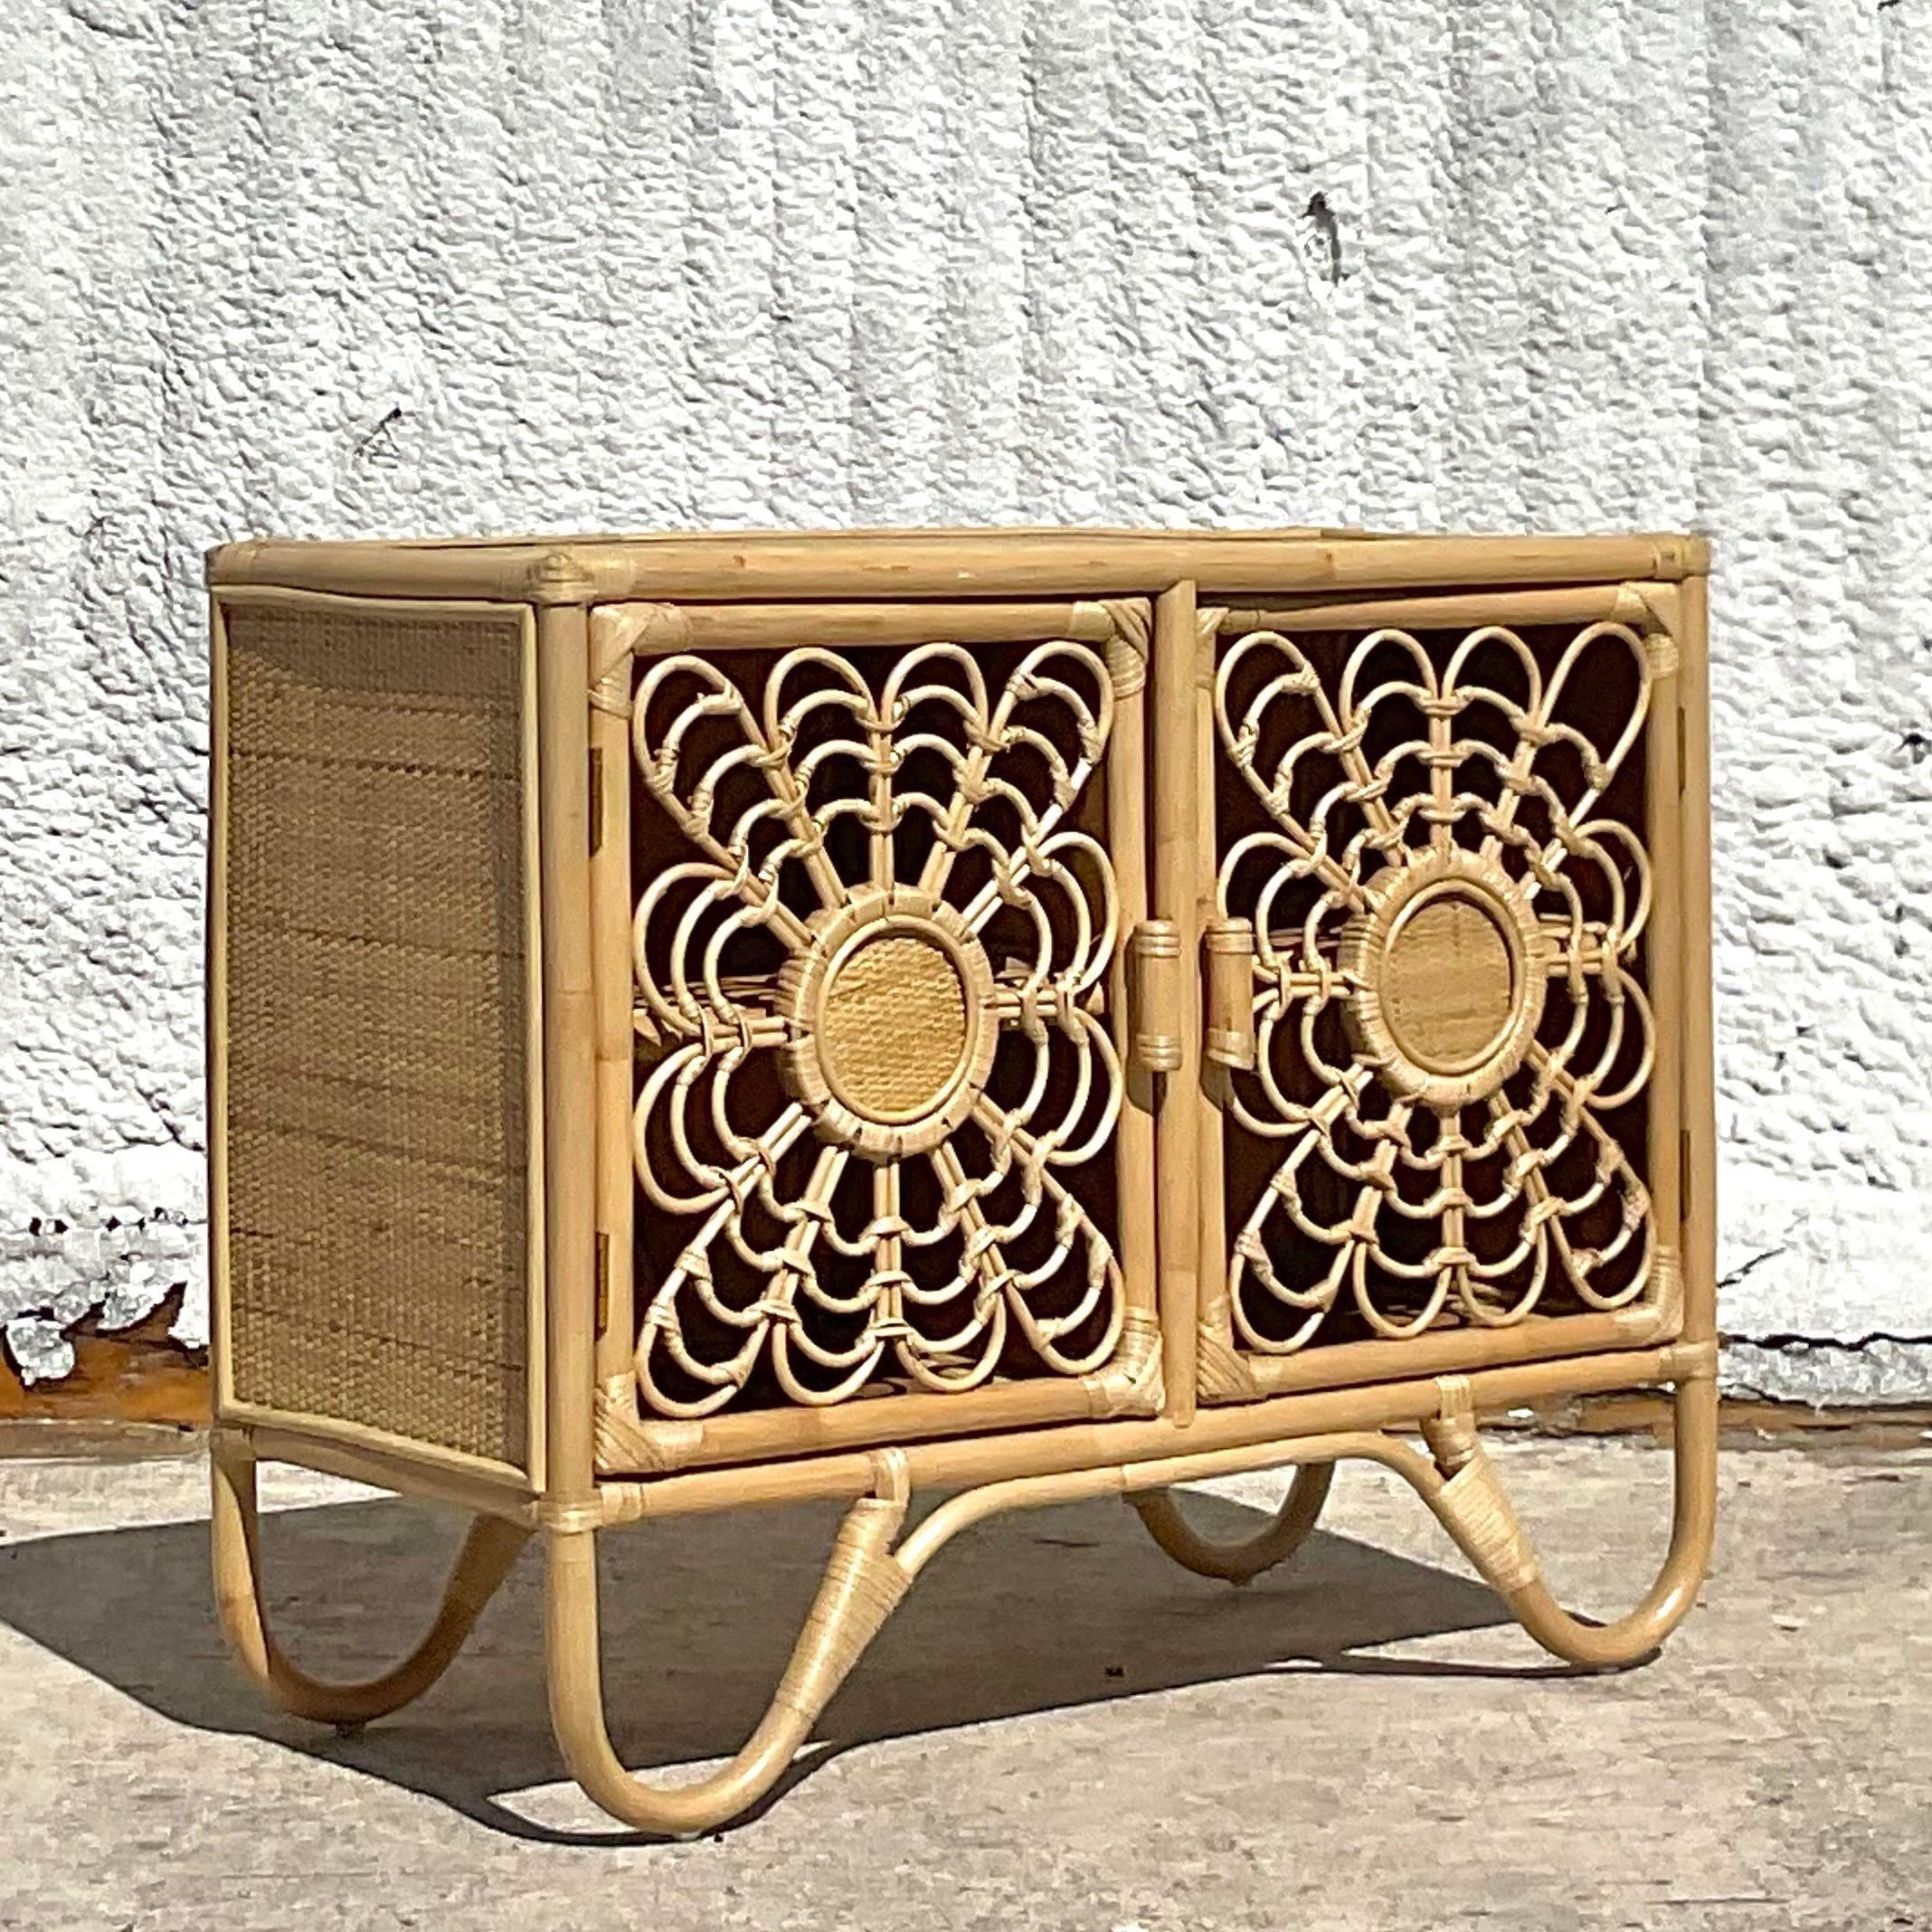 A fabulous vintage coastal sideboard. Beautiful floral rattan design with inset woven rattan panels. Lots of great storage inside. Acquired from a Palm Beach estate